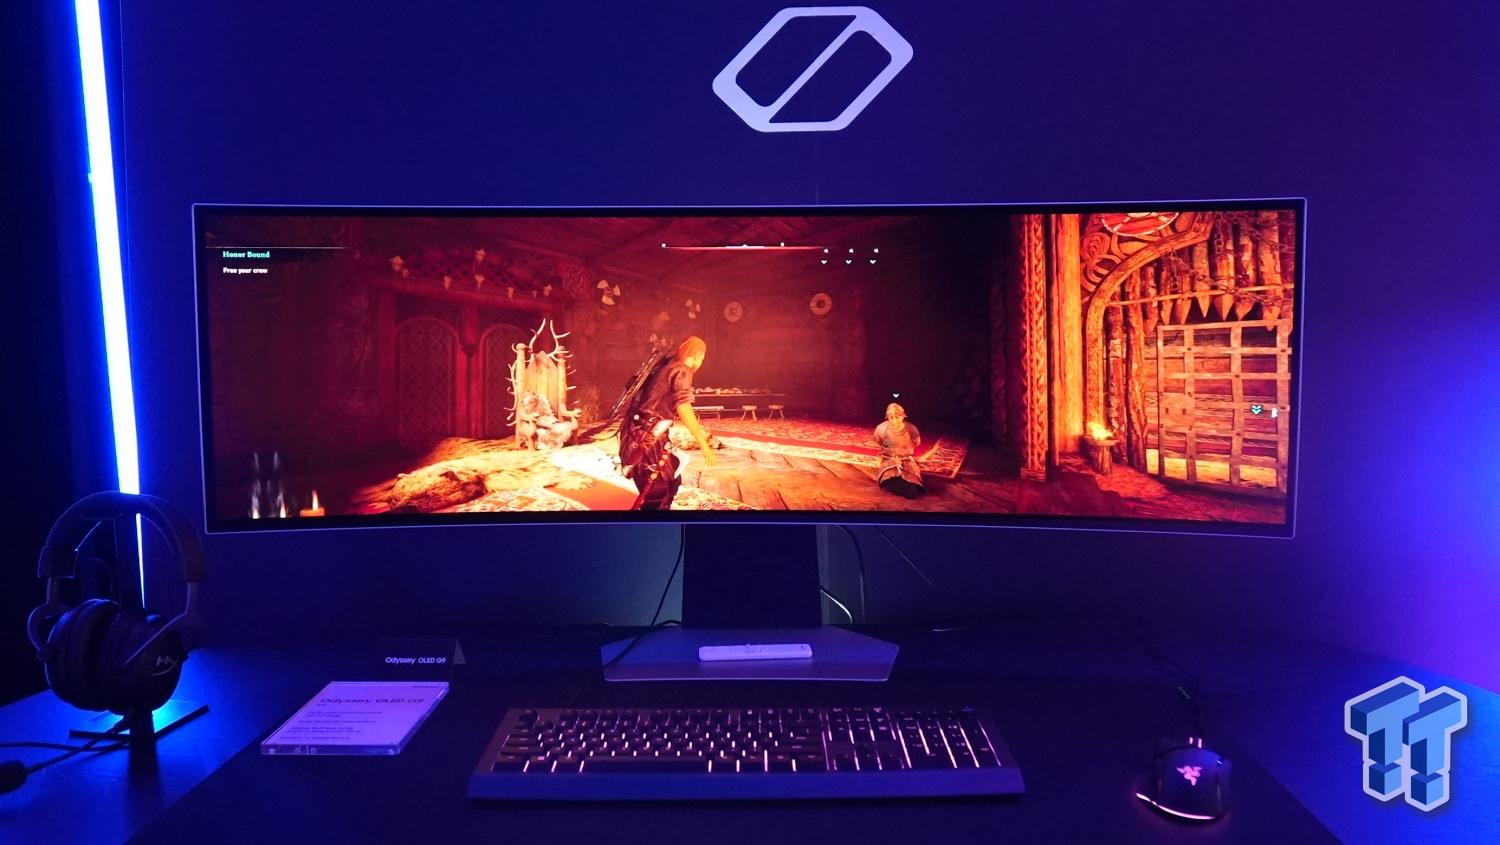 Samsung's new Odyssey Neo G9 packs two 4K displays into one monitor